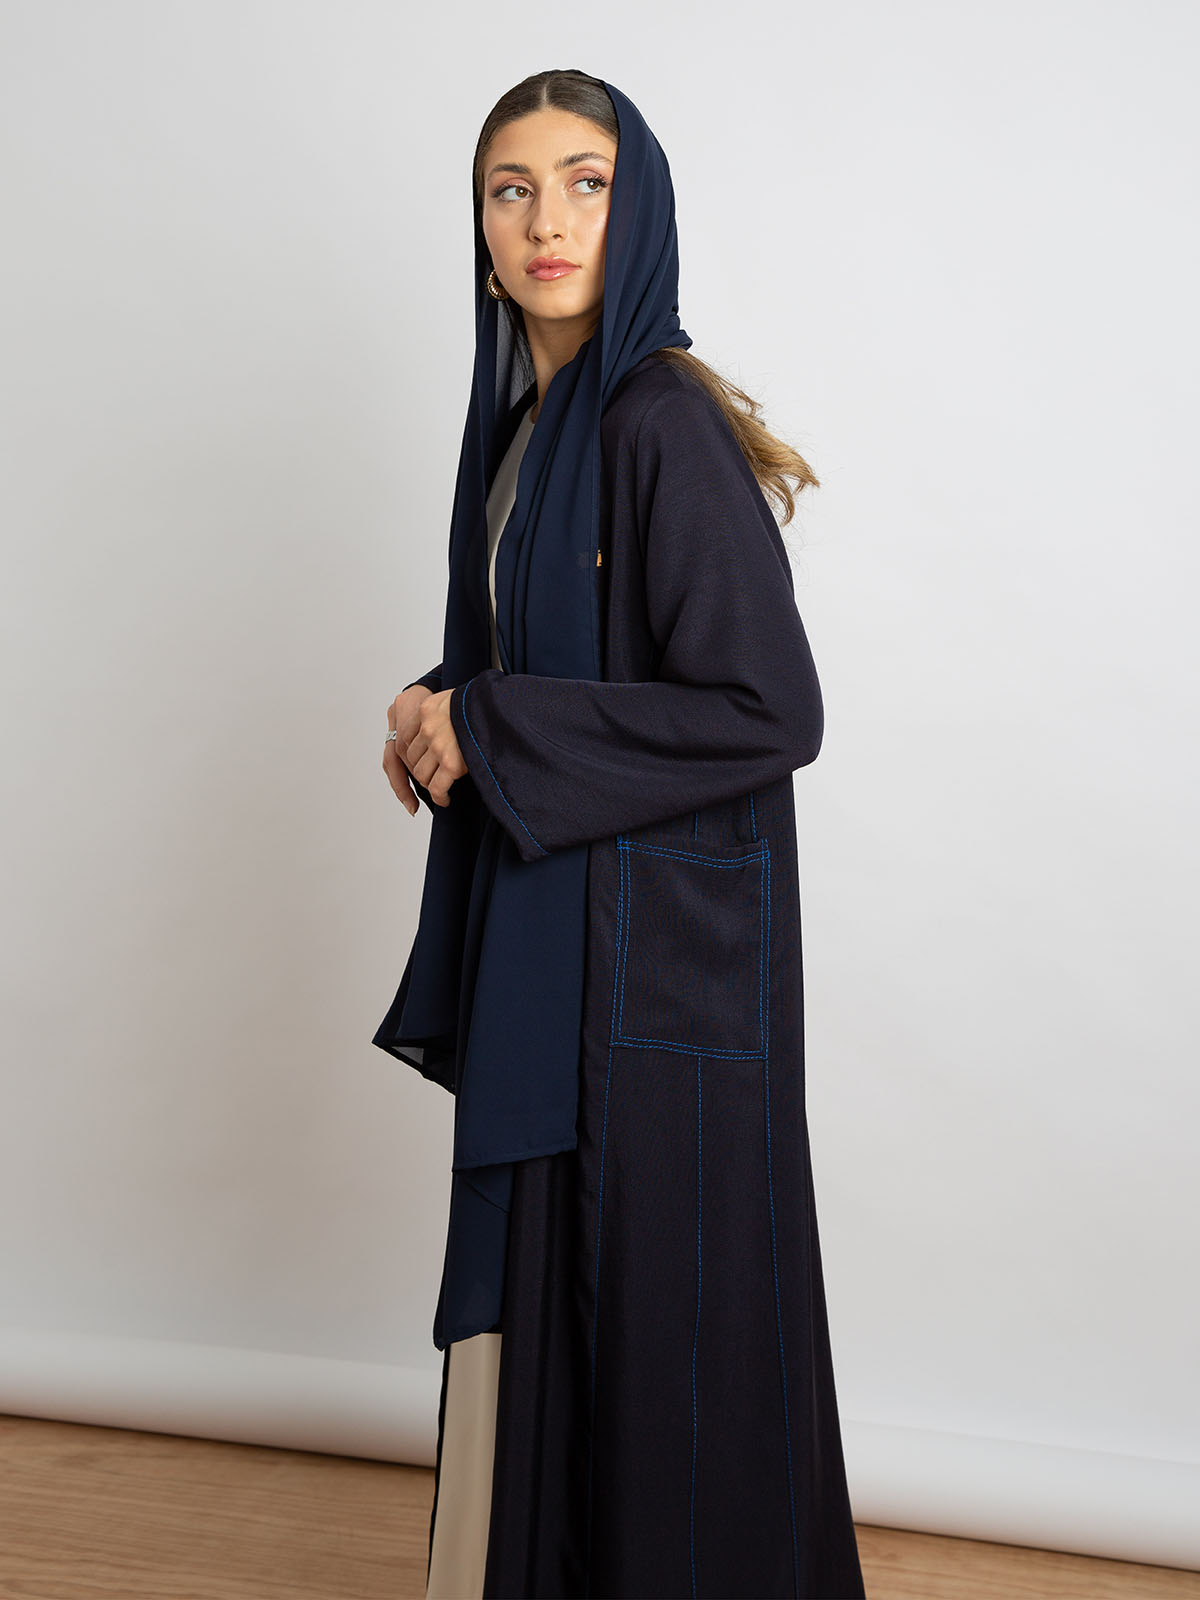 Kaafmeem women clothing regular fit navy long practical salona abstract daily abaya with two pockets in lightweight fabric